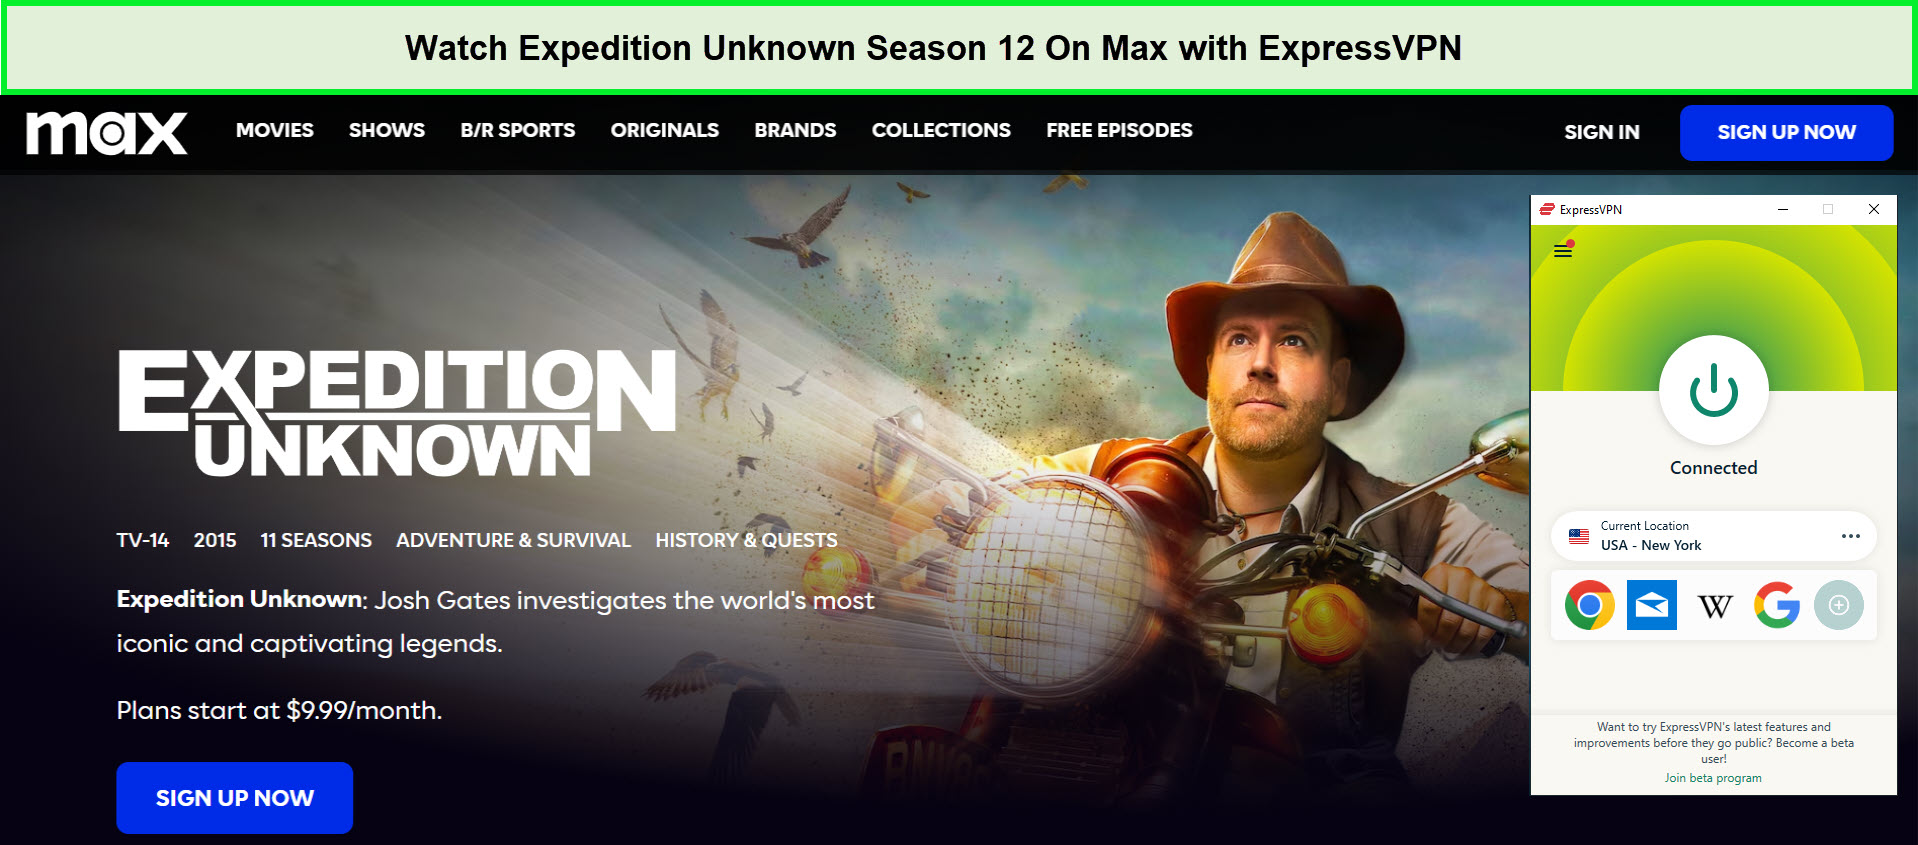 Watch-Expedition-Unknown-Season-12-in-Spain-On-Max-with-ExpressVPN